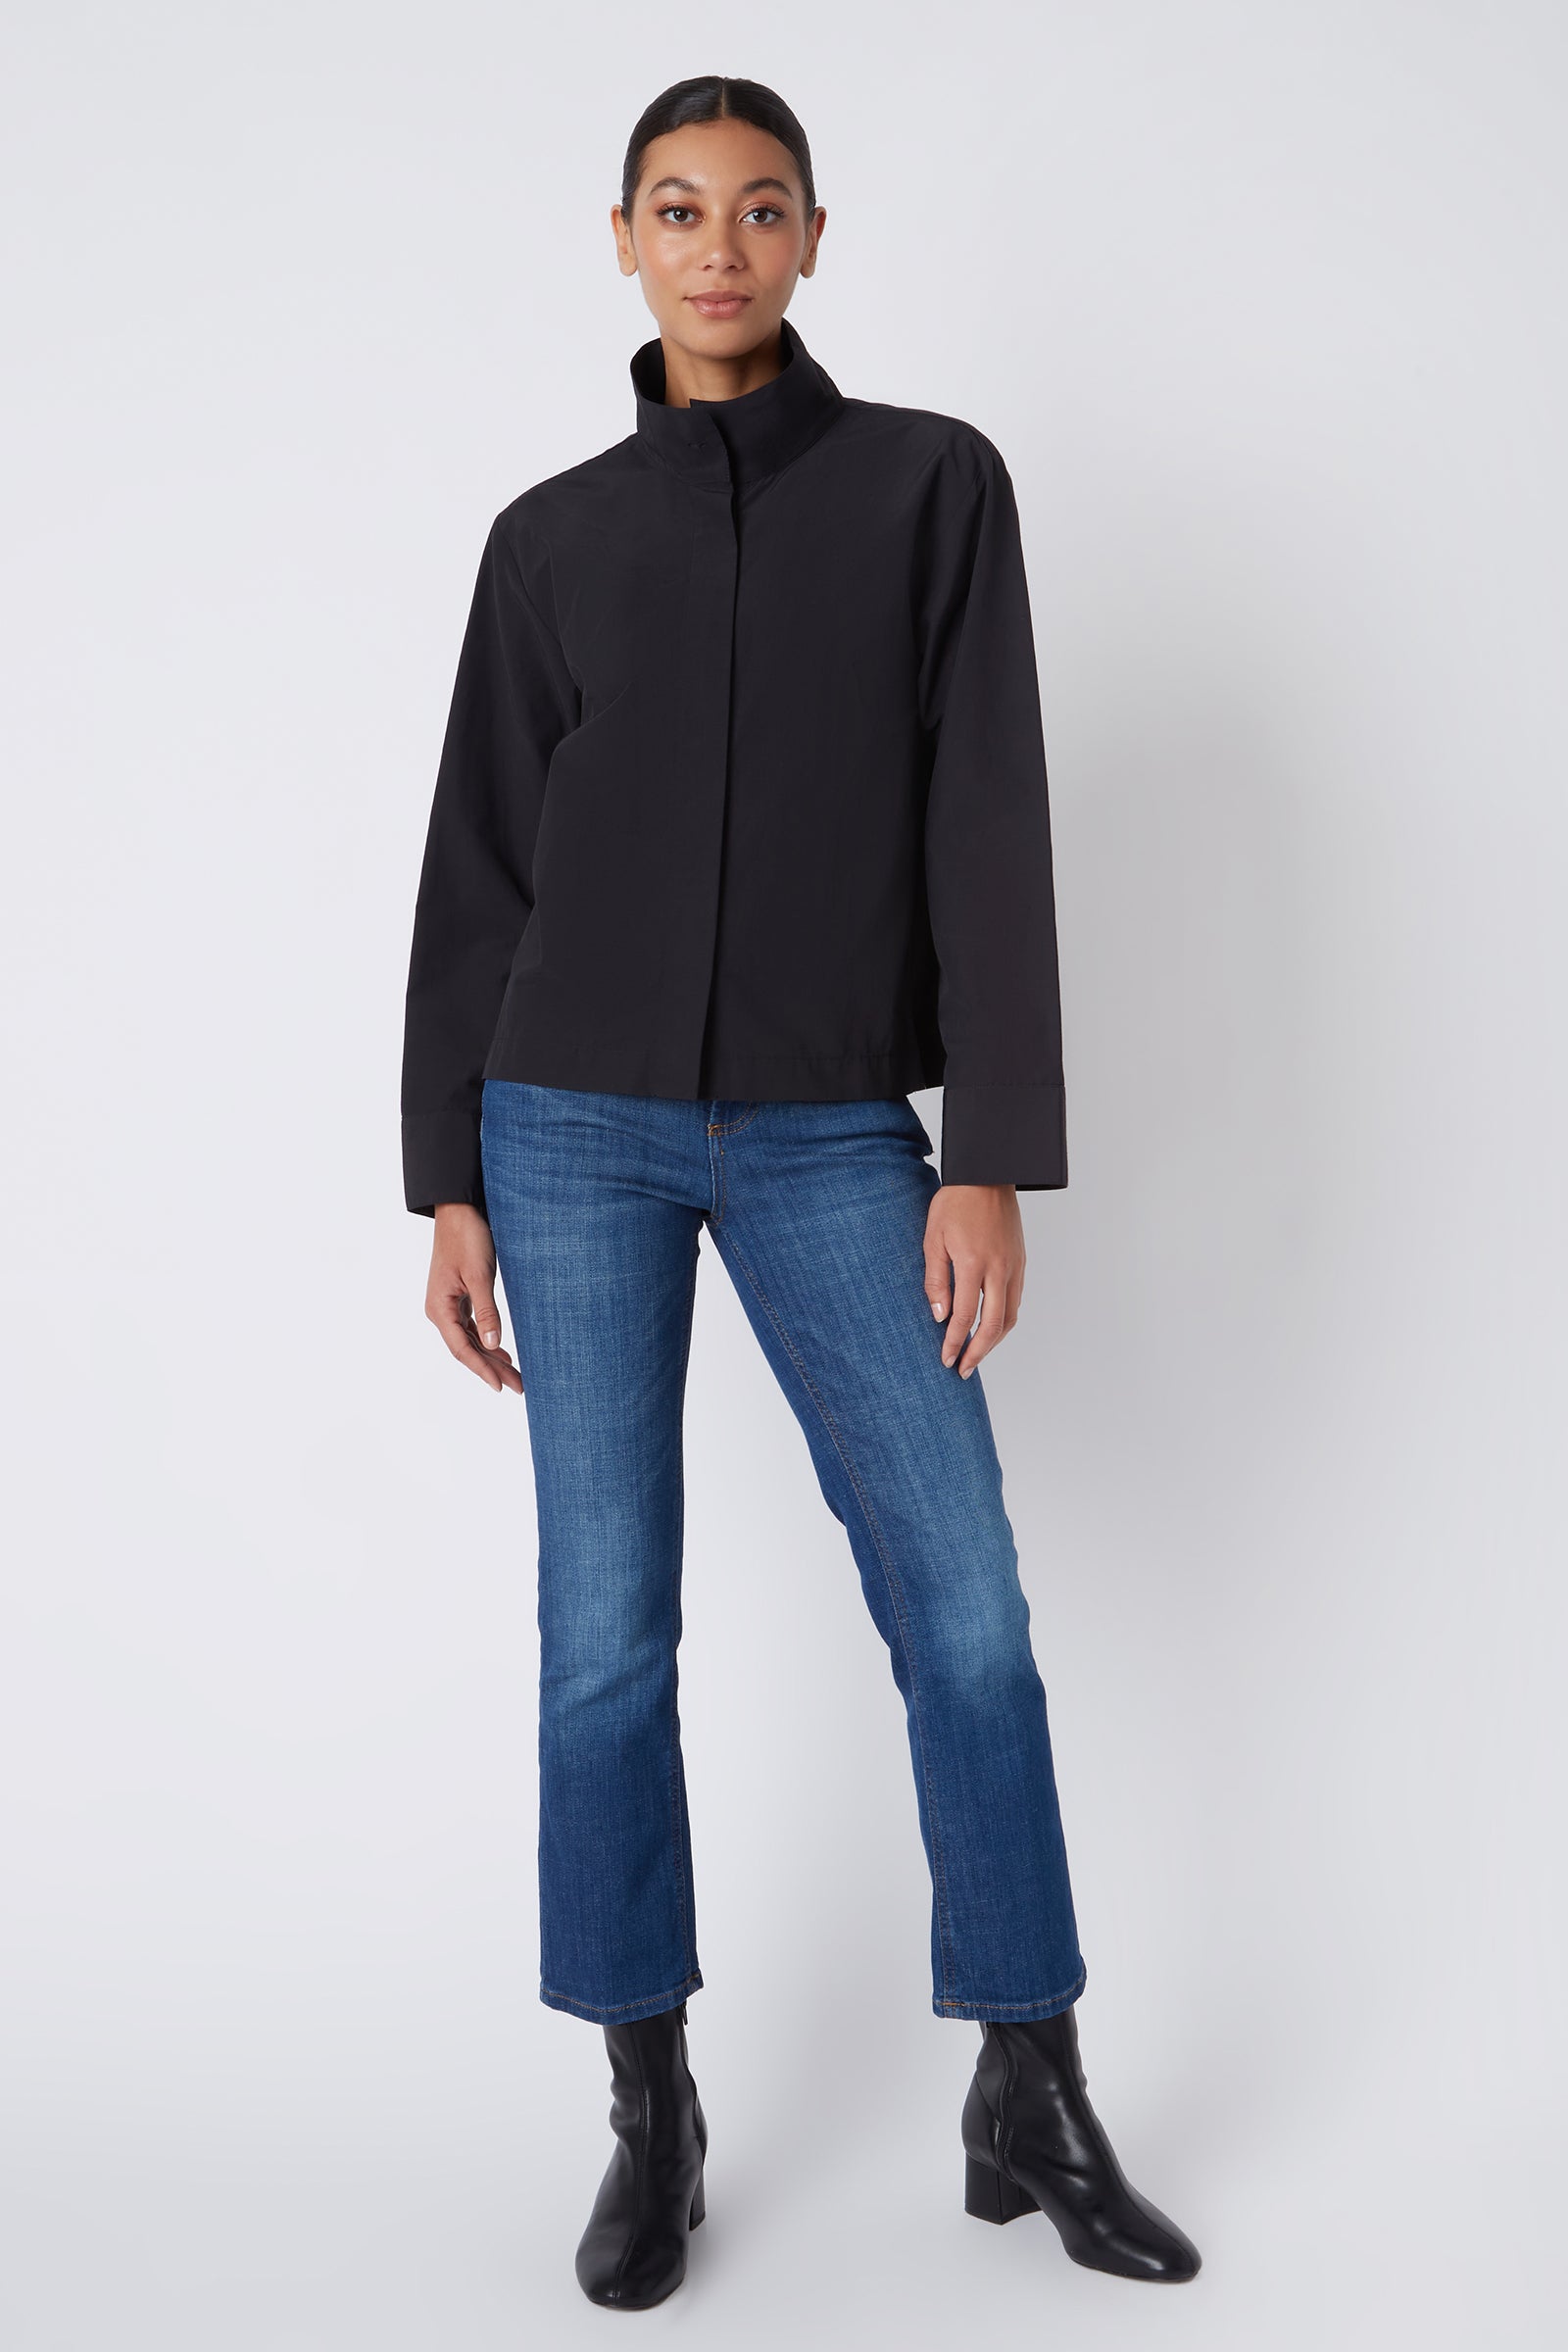 Kal Rieman Peggy Collared Shirt in Black on Model Full Front View